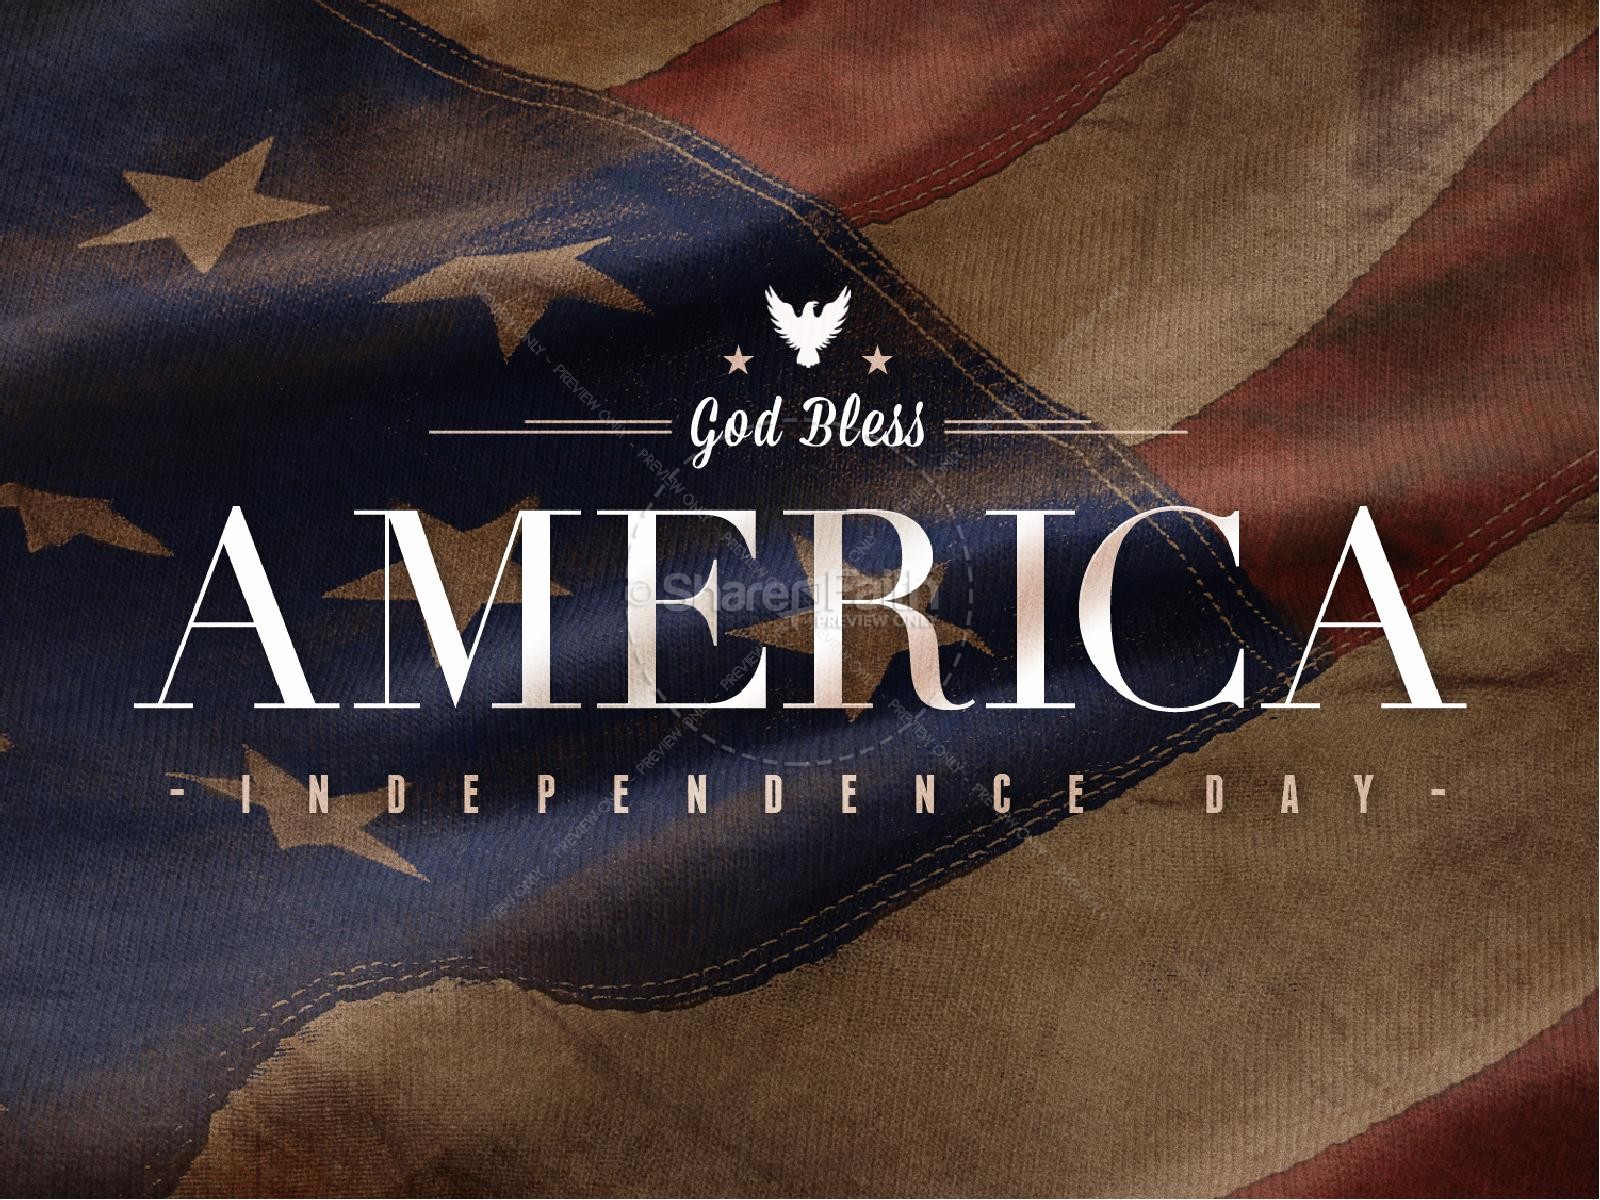 God Bless America Backgrounds, Compatible - PC, Mobile, Gadgets| 1600x1200 px